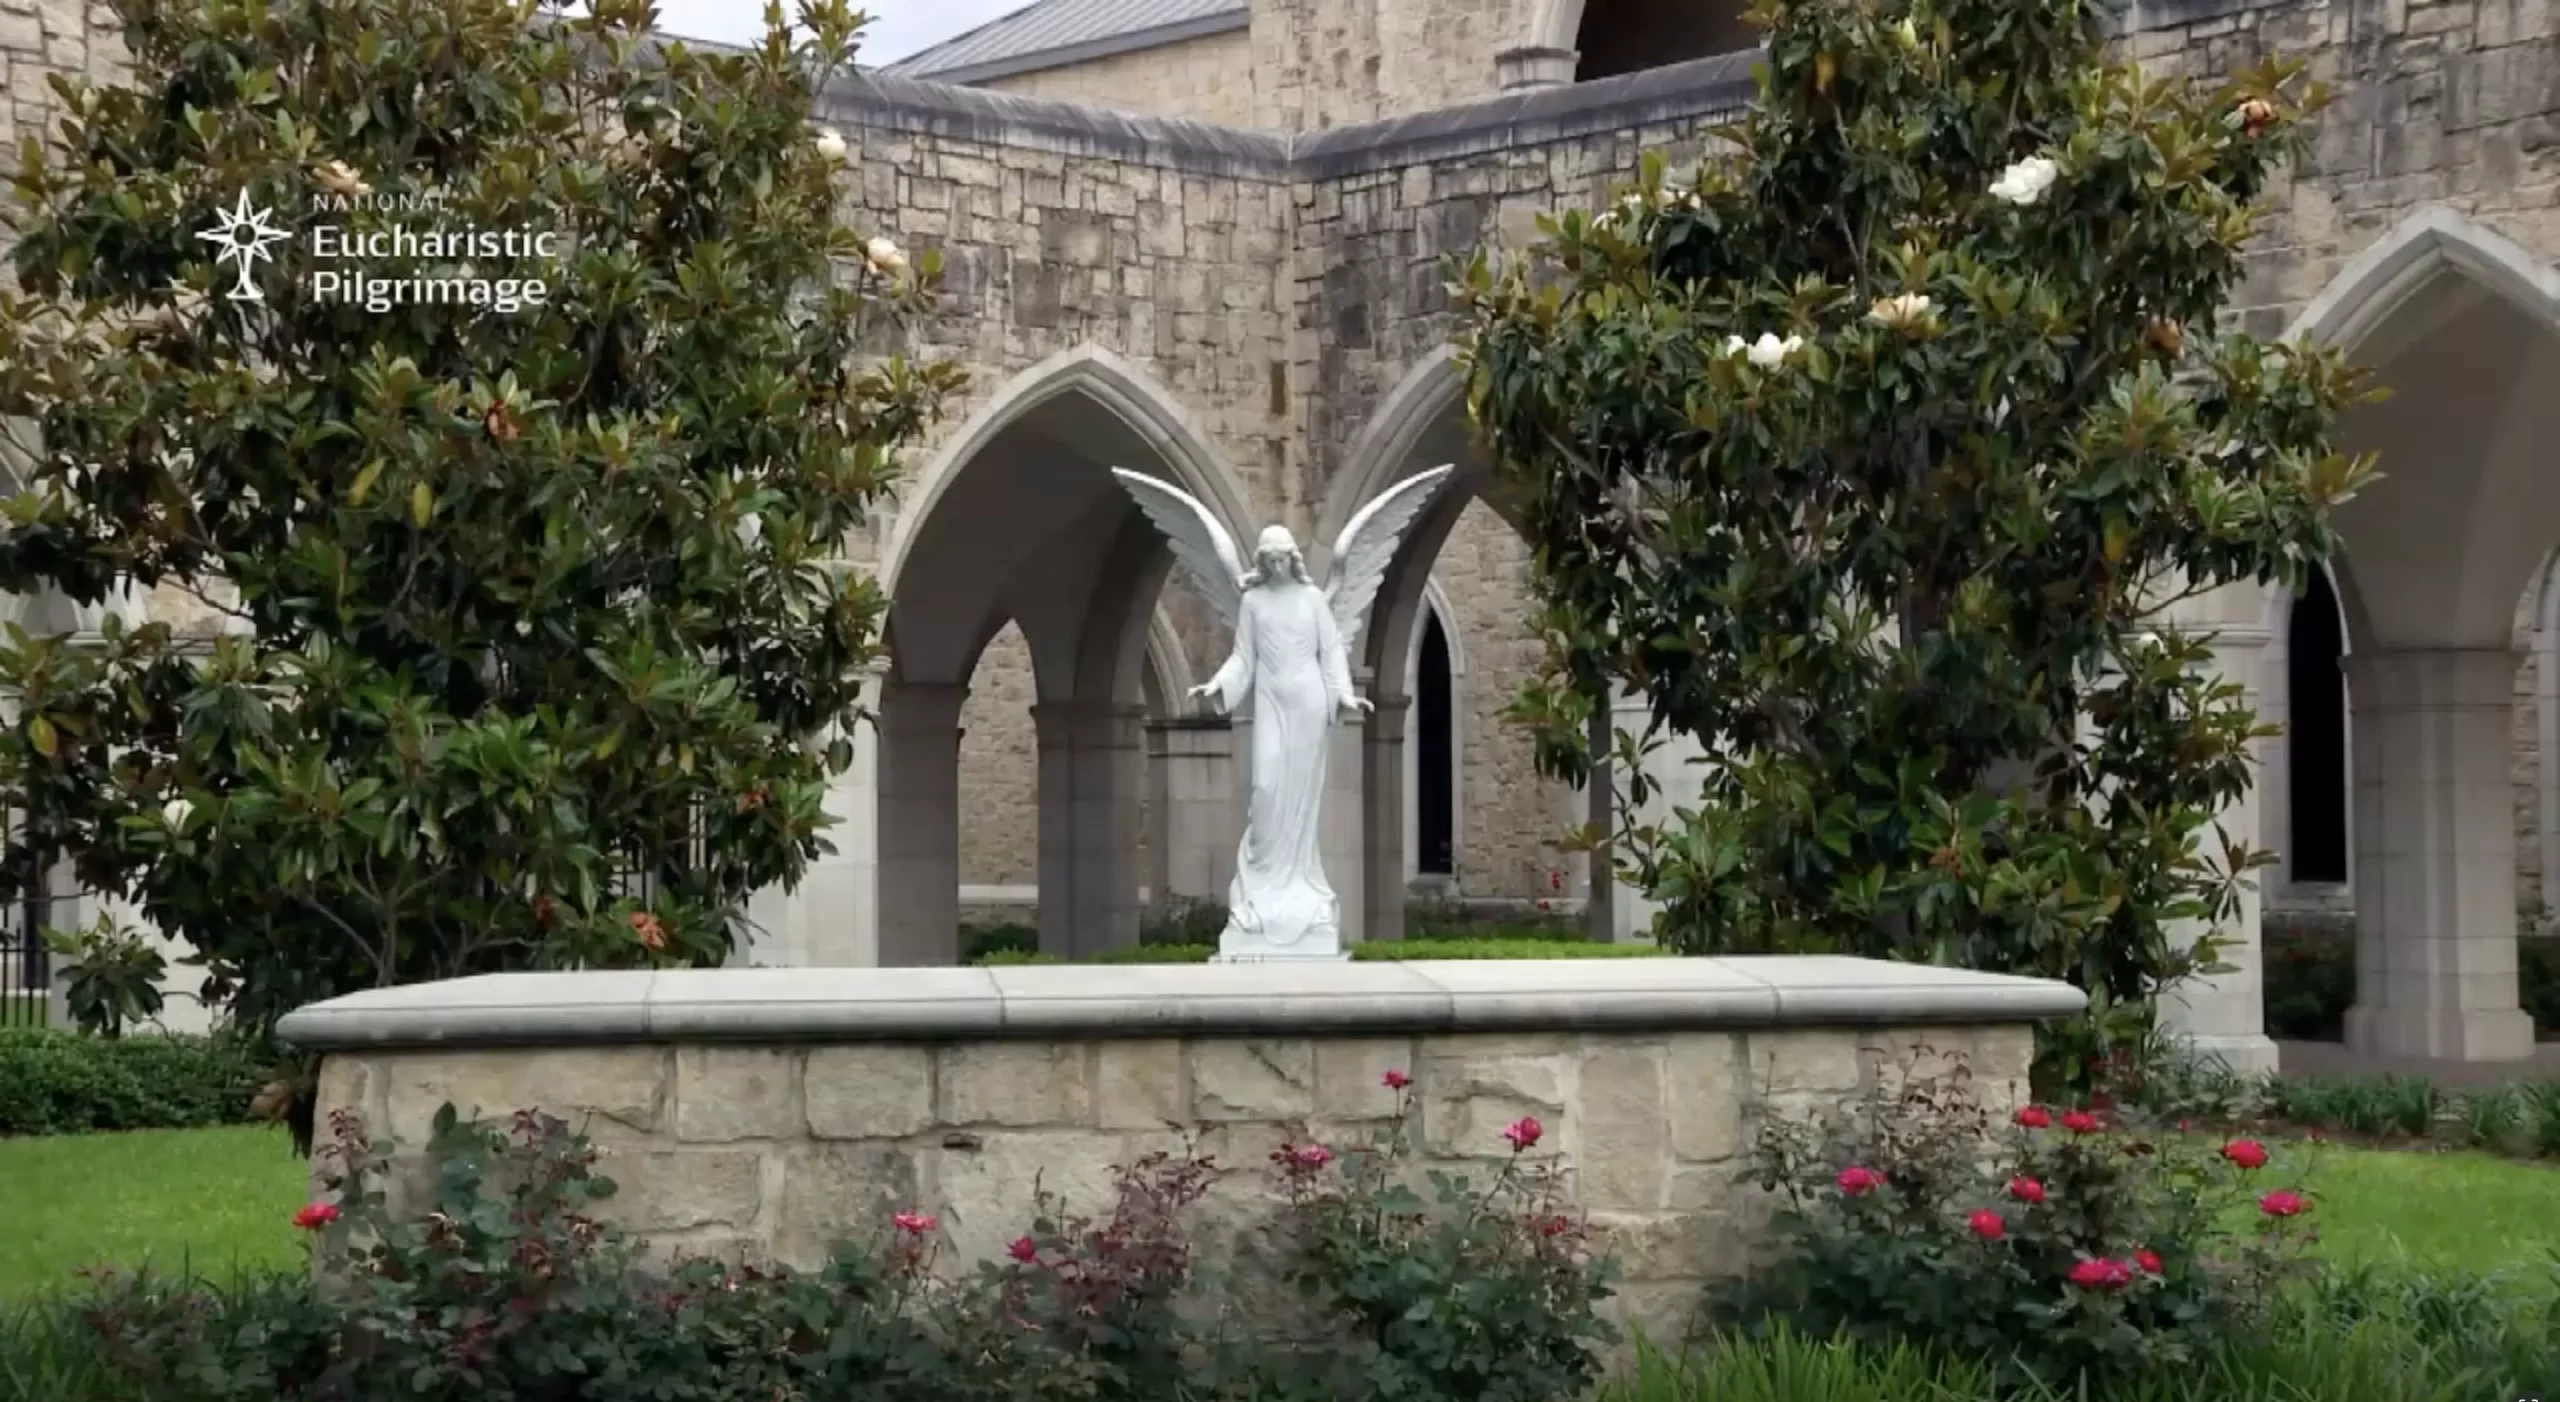 Courtyard of Our Lady of Walsingham in Houston, a parish of the Anglican ordinariate. Credit: Screenshot from EWTN News In Depth